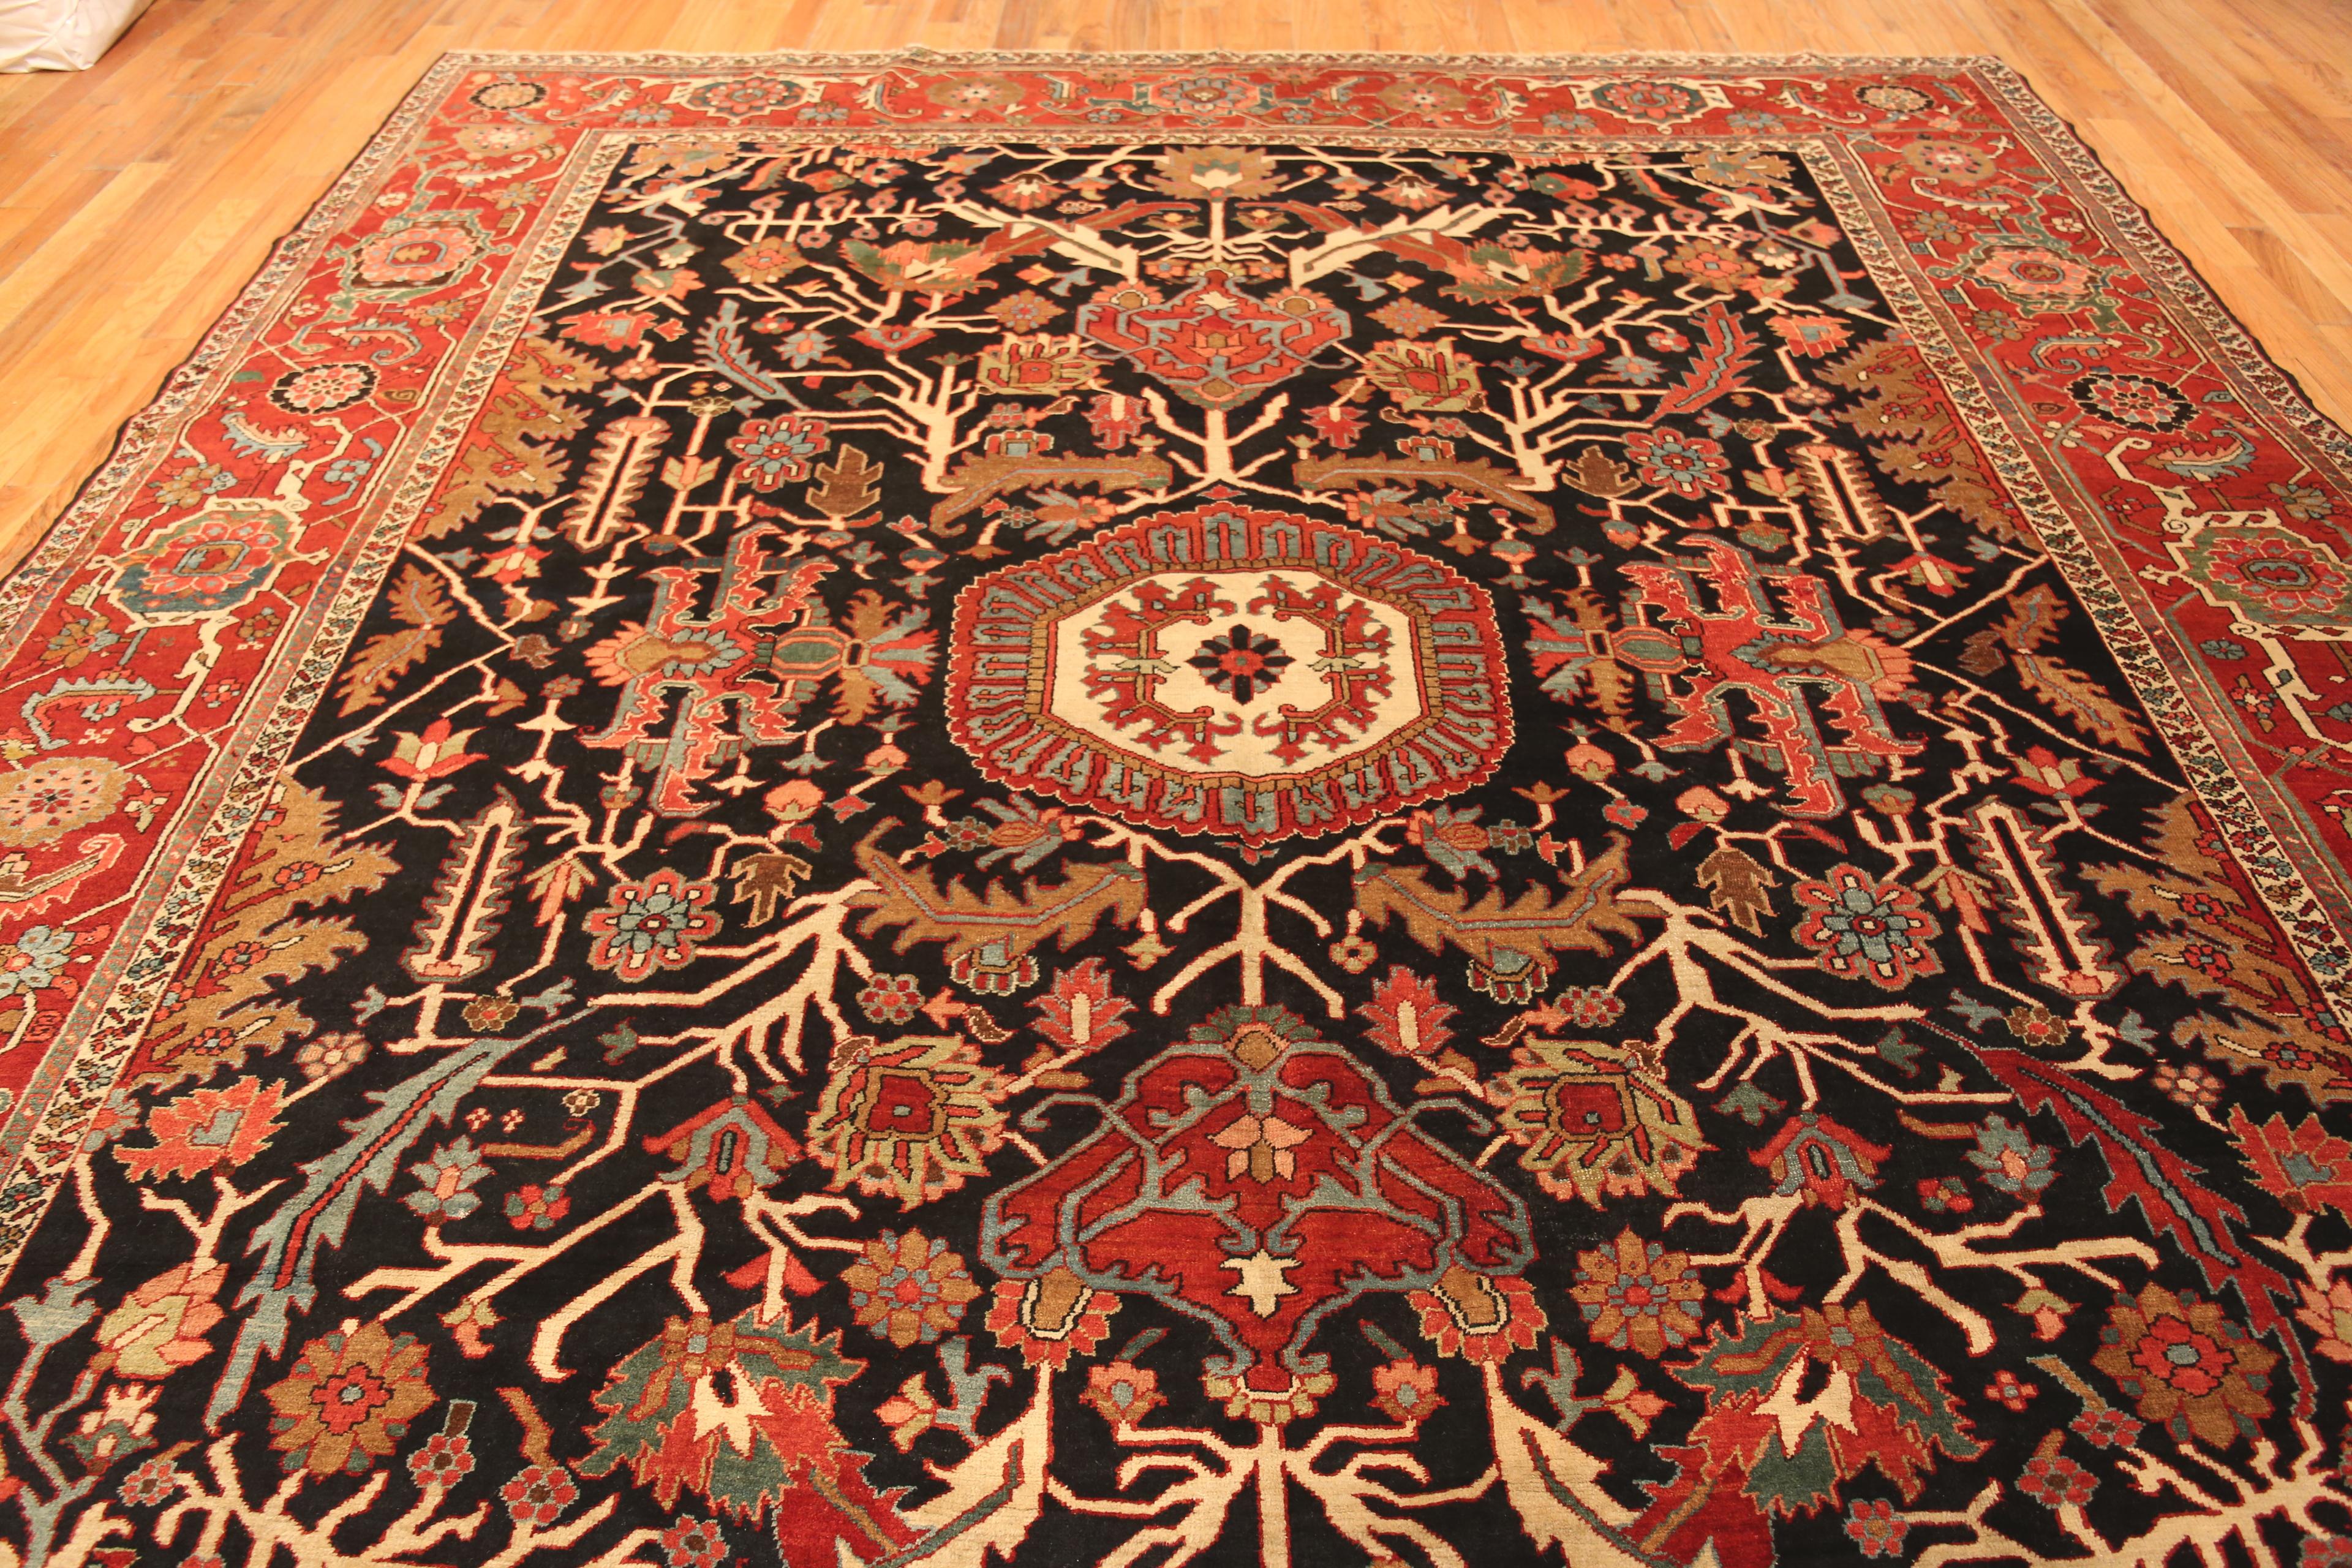 Bold Tribal Antique Room Size Blue Persian Heriz Serapi Rug, Country of Origin: Persia, Circa date: 1920. Size: 11 ft 6 in x 13 ft 2 in (3.51 m x 4.01 m)